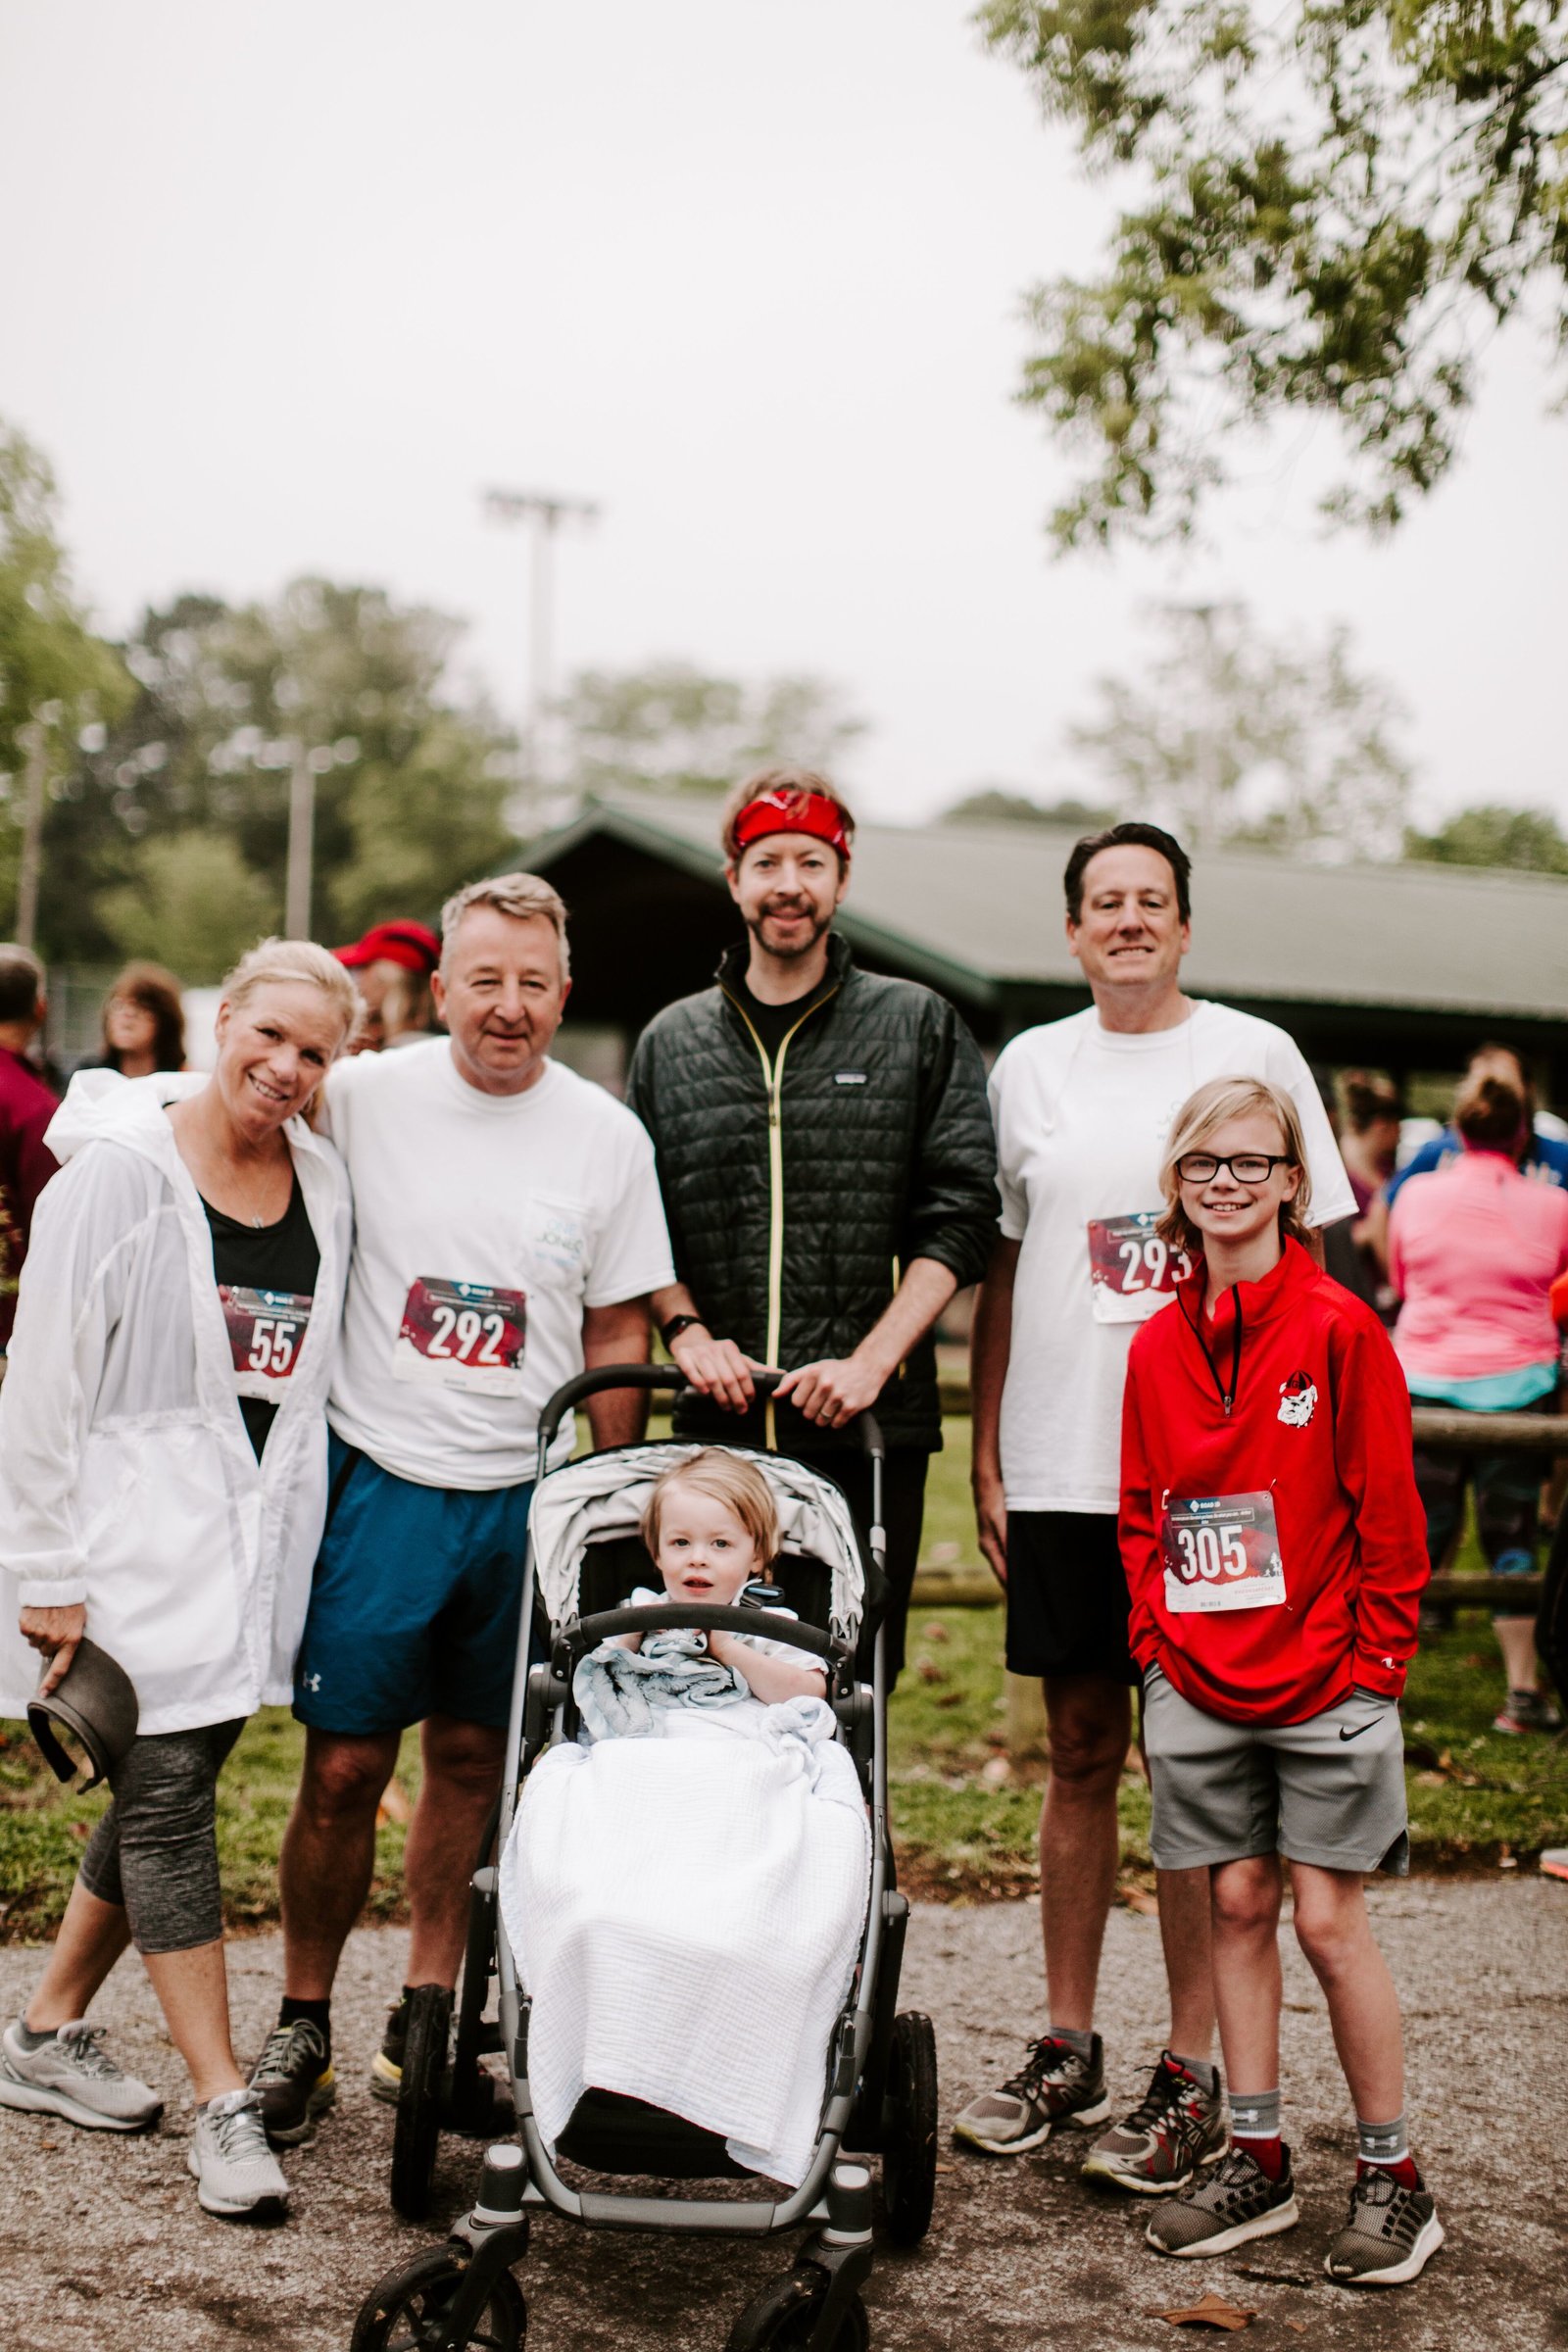 2019 West Tennessee Strawberry Festival - 5k Race - 43